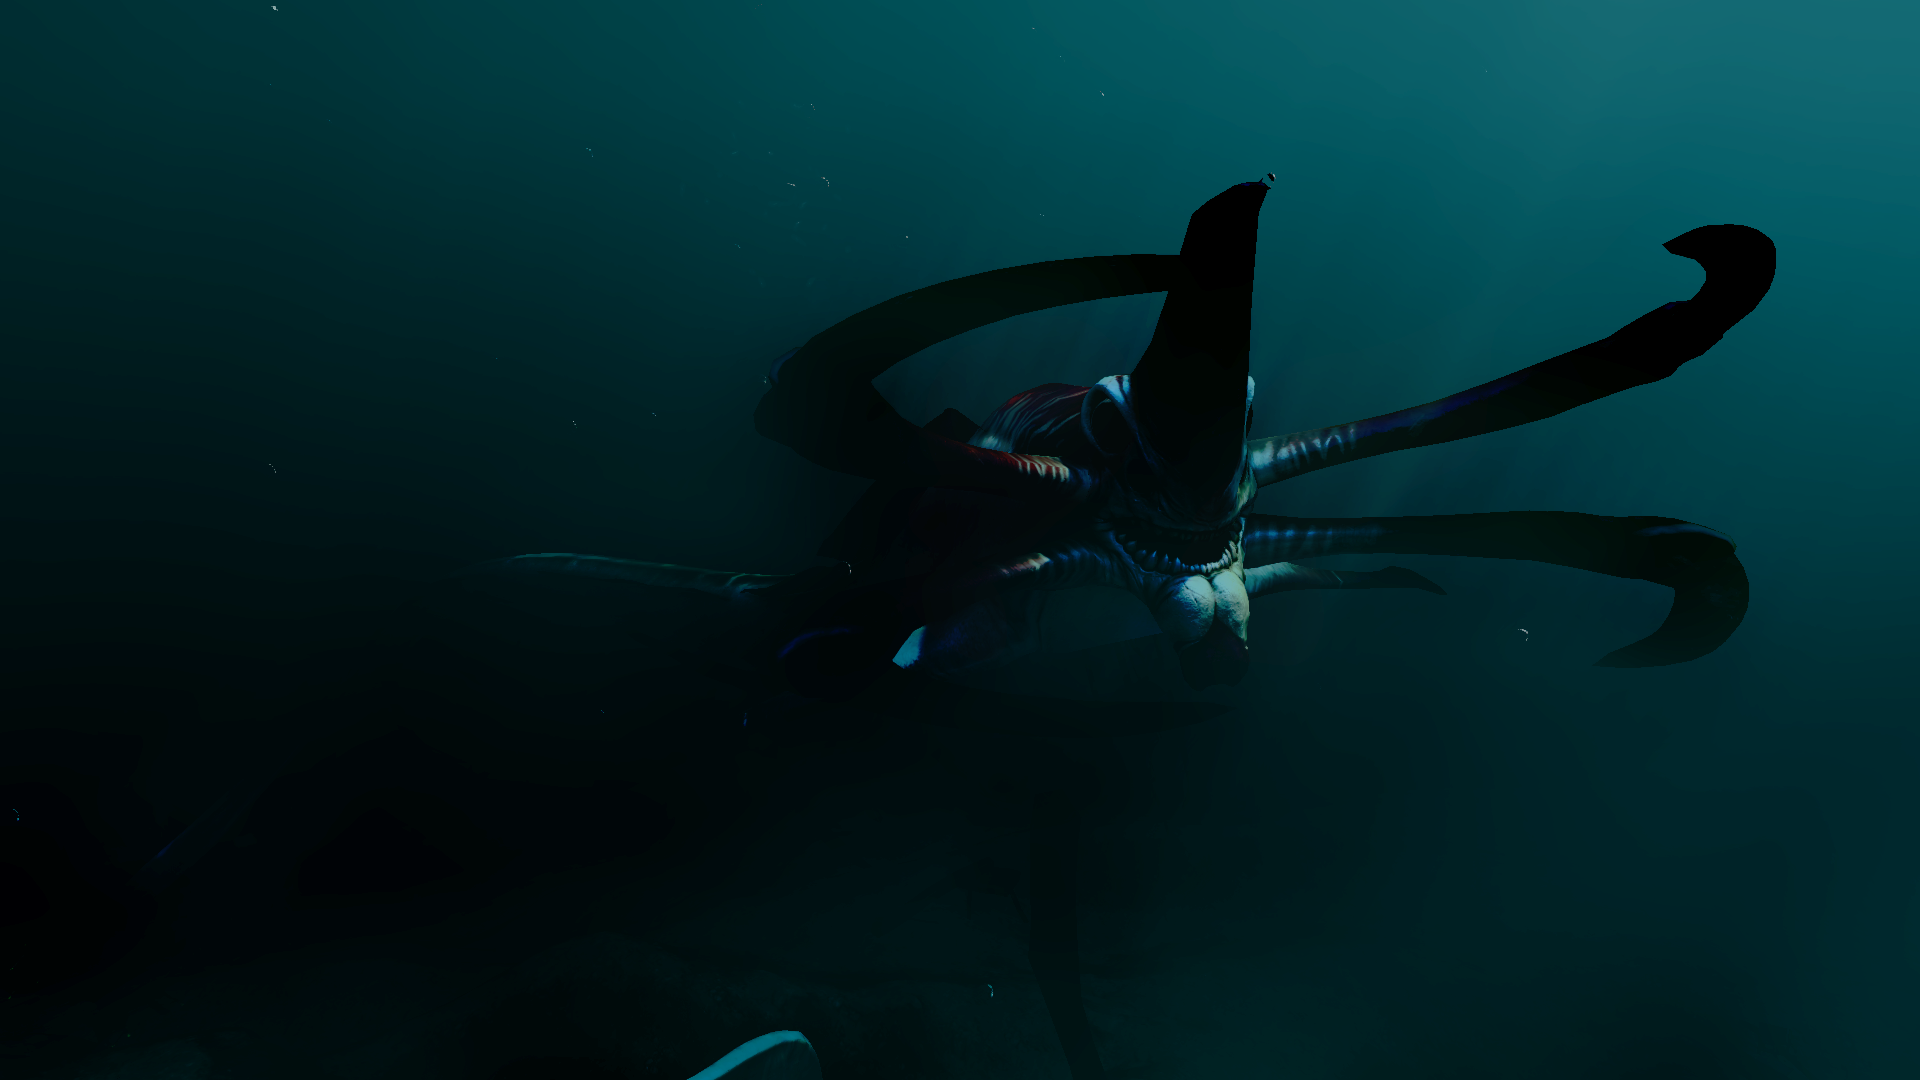 I edited a screenshot I took of the new Reaper Leviathan skin, and it's very spooks